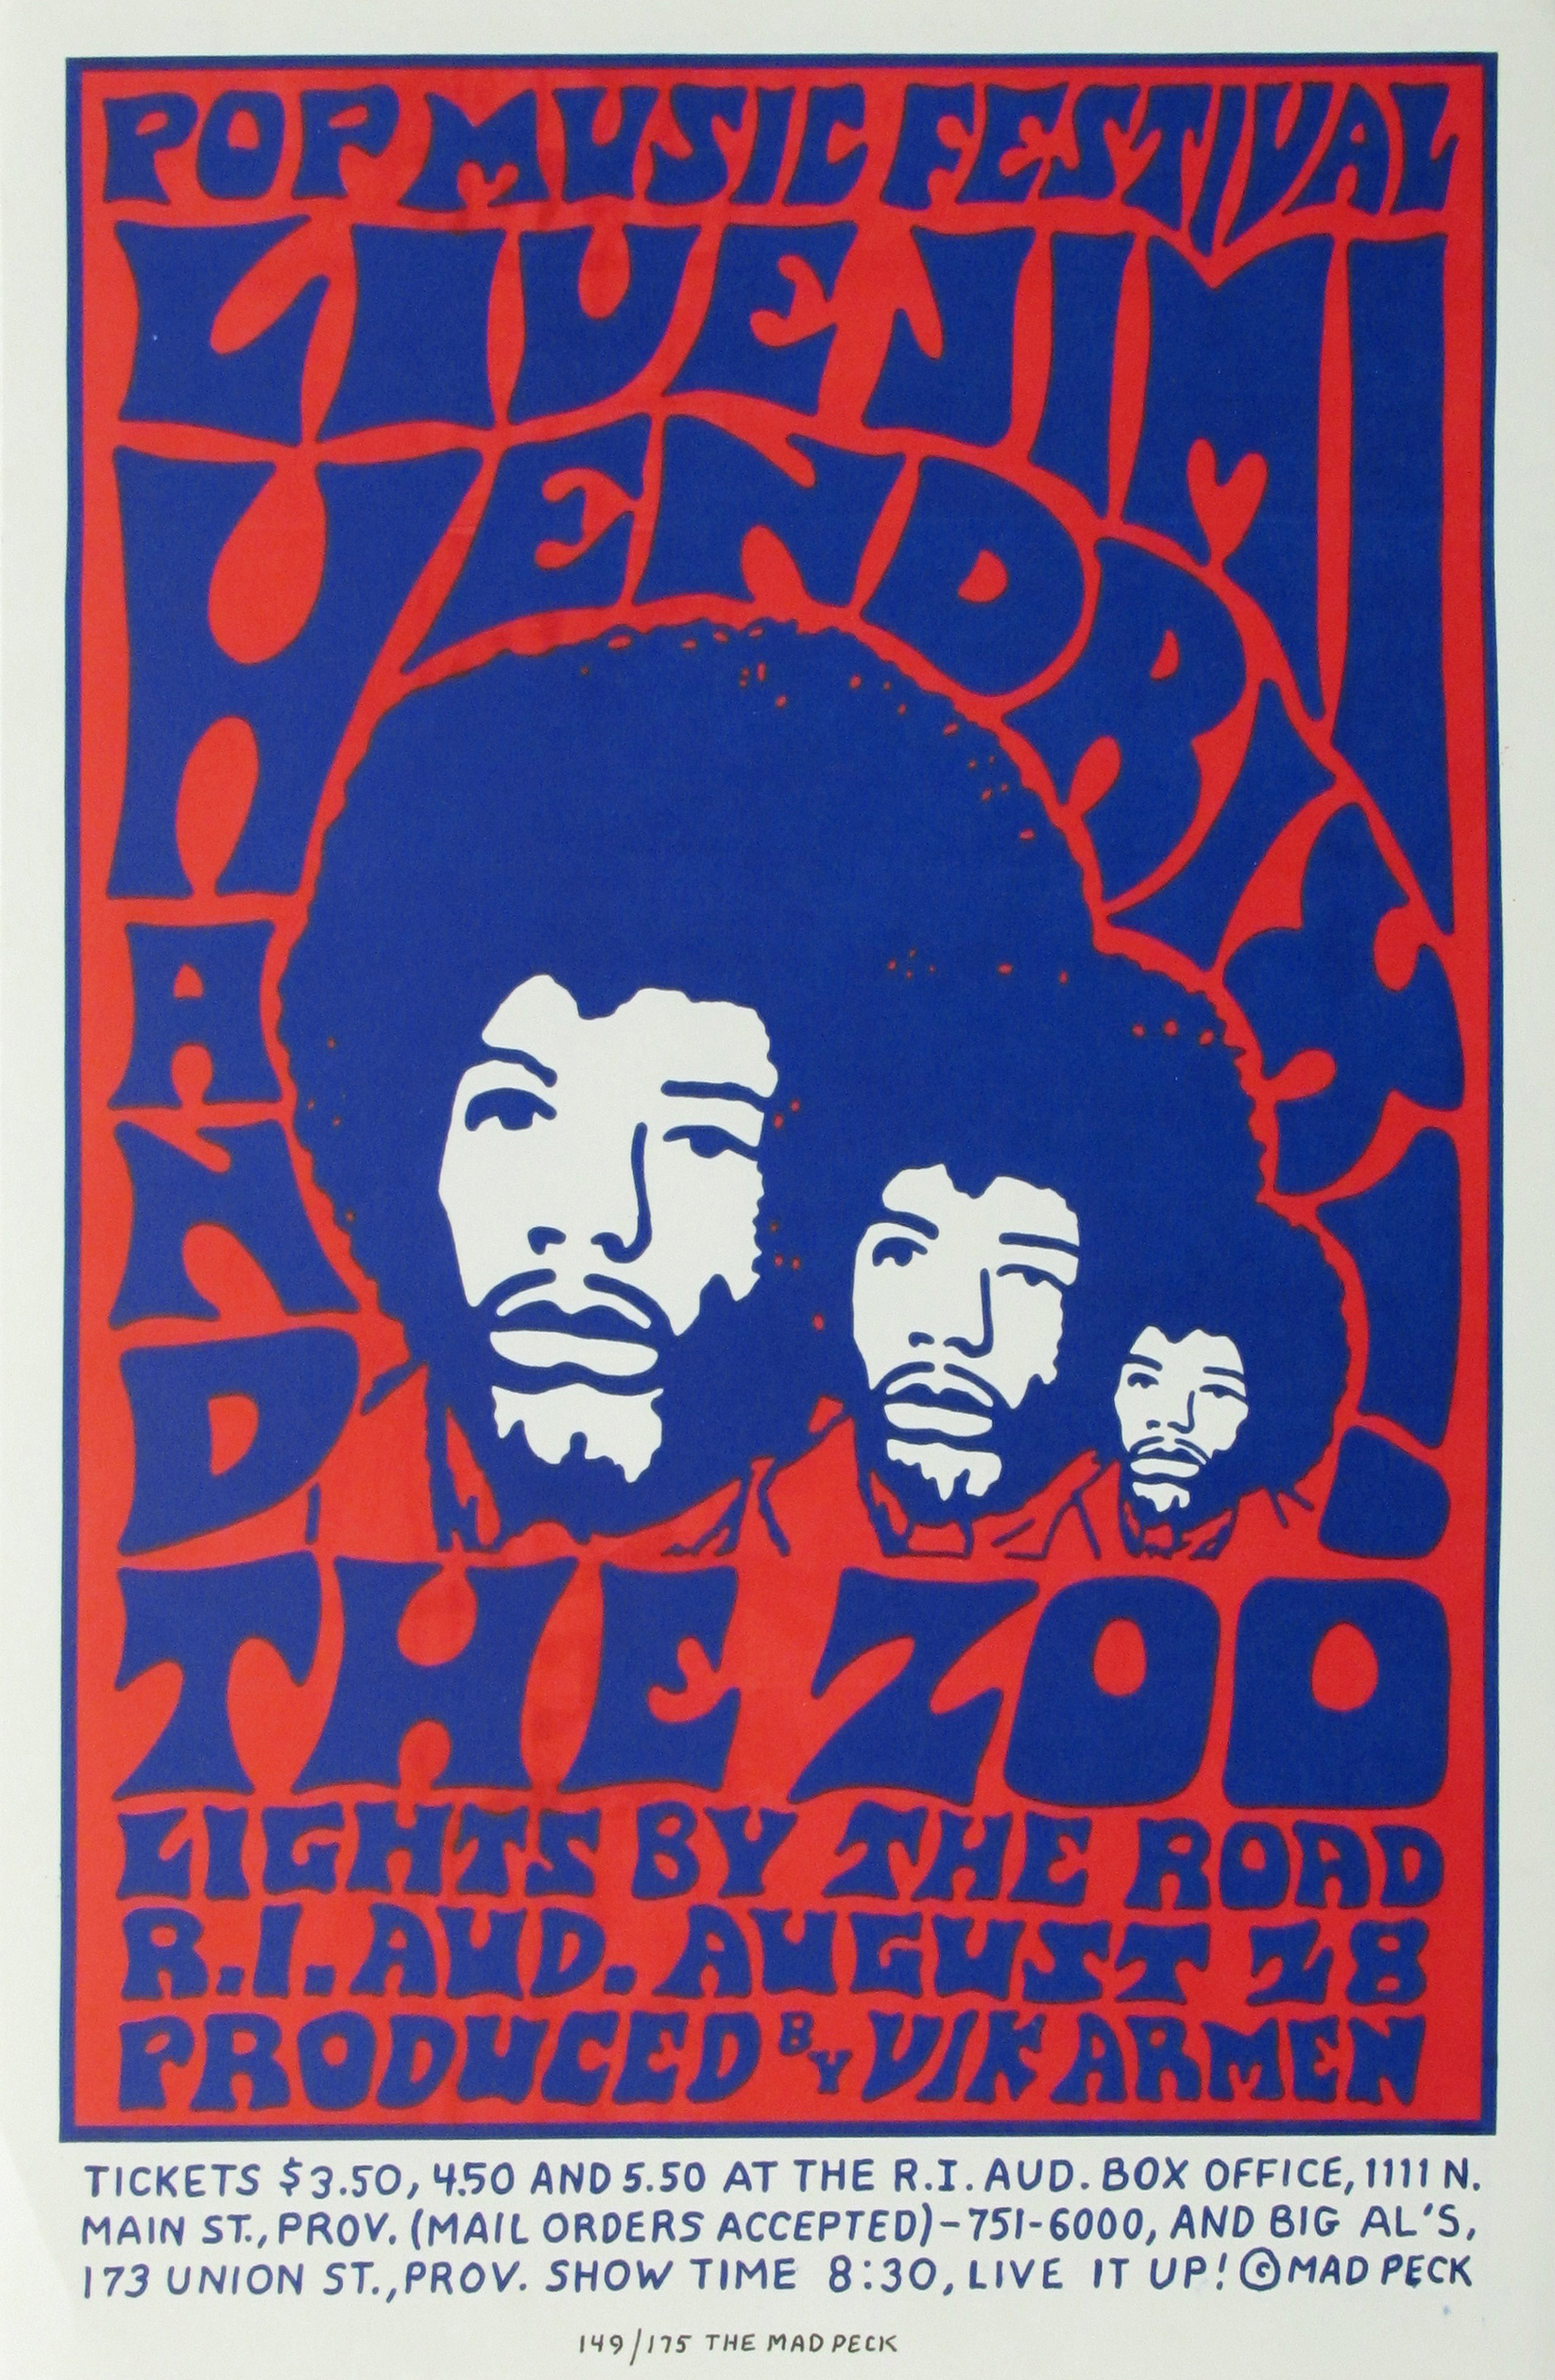 Jimi Hendrix and The Zoo Original Limited Edition Concert Poster